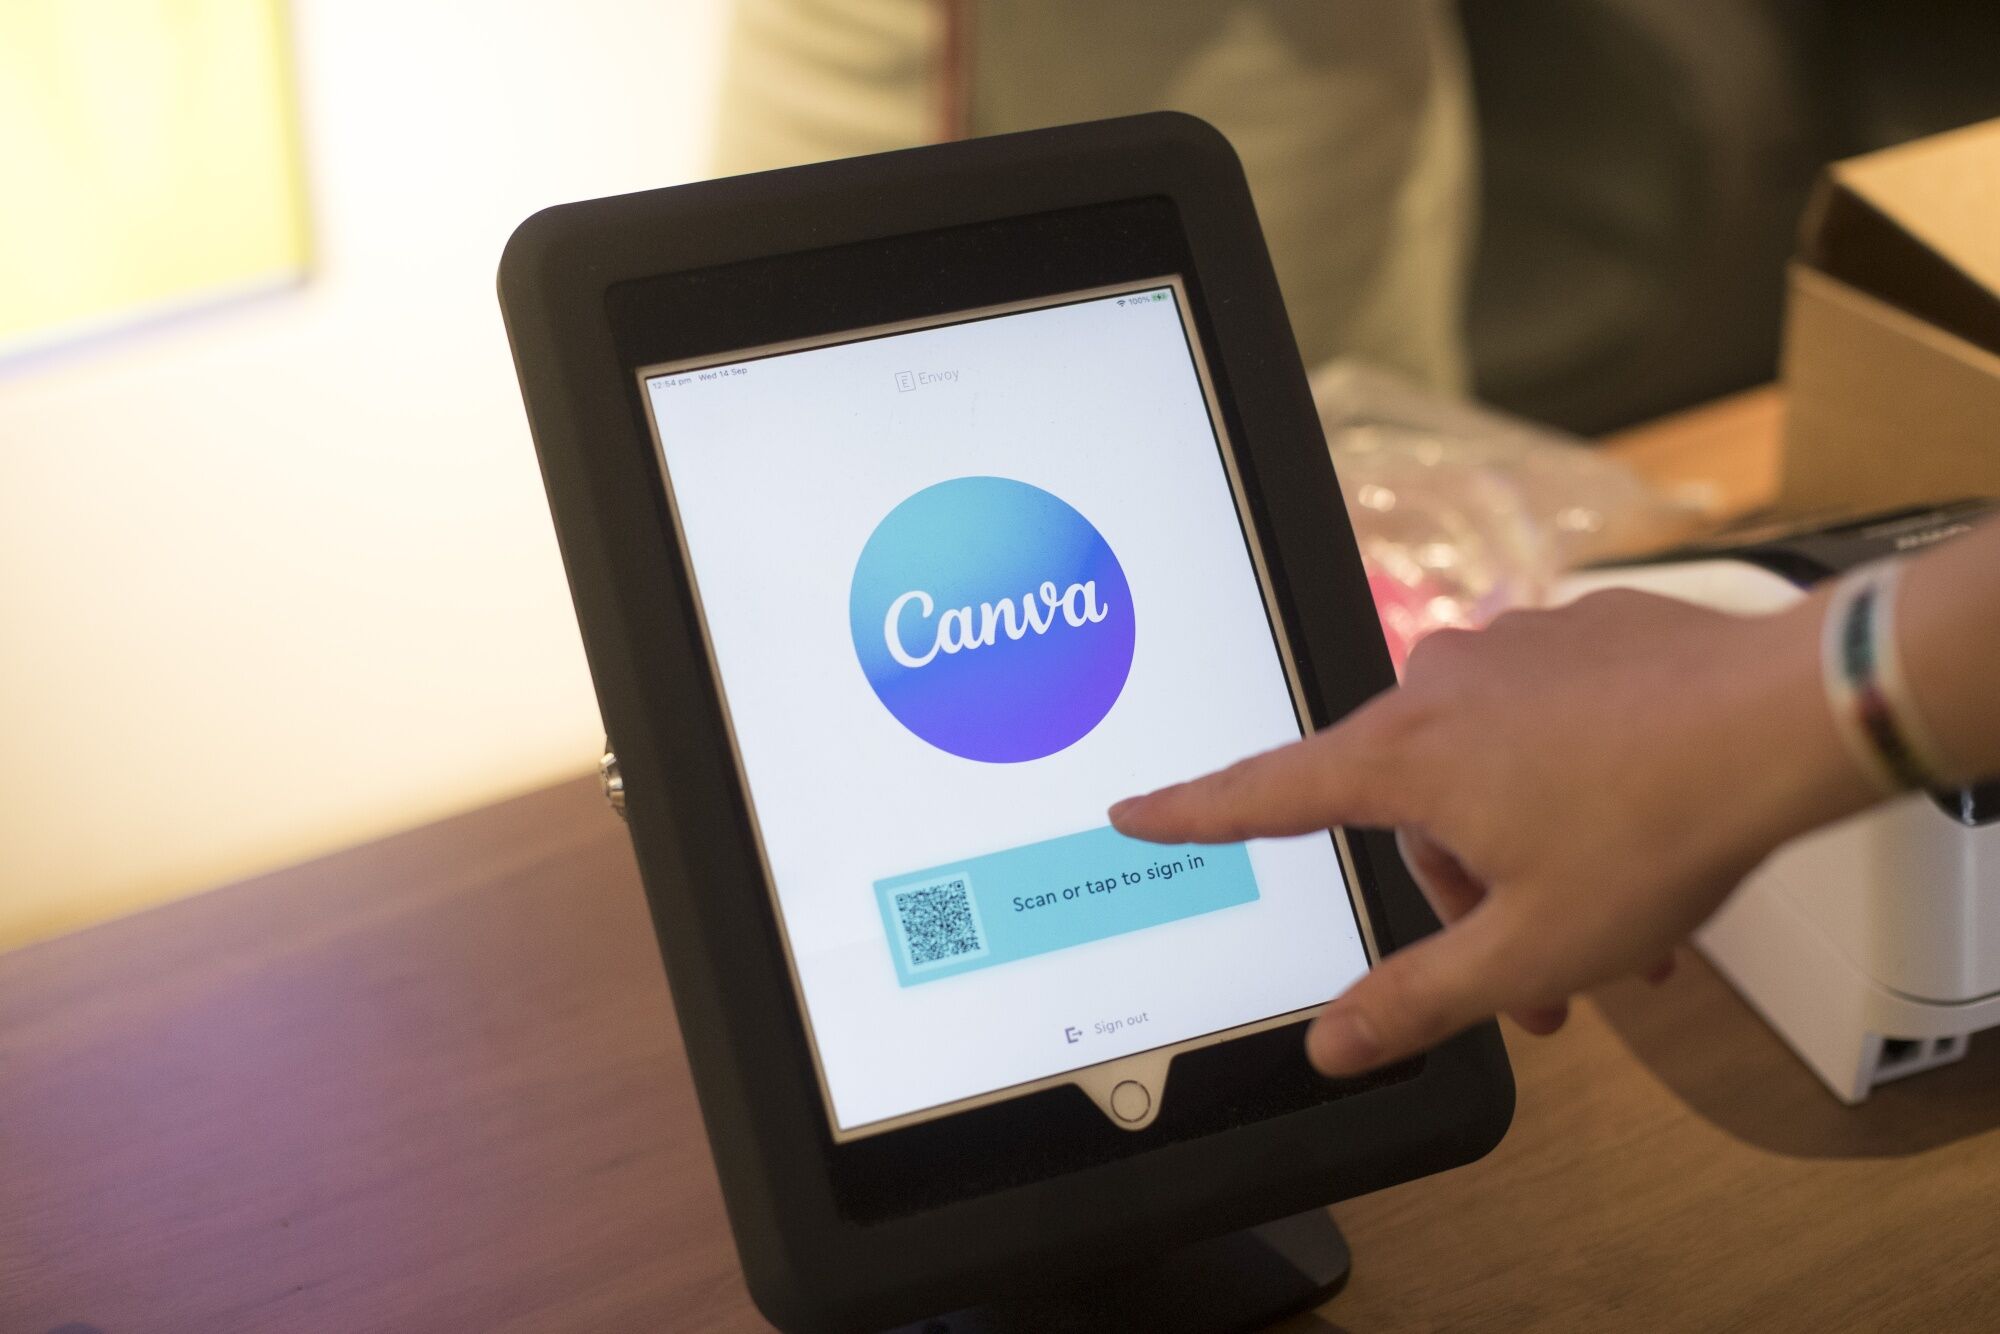 canva holders are said to near expanded $1.5 billion share sale